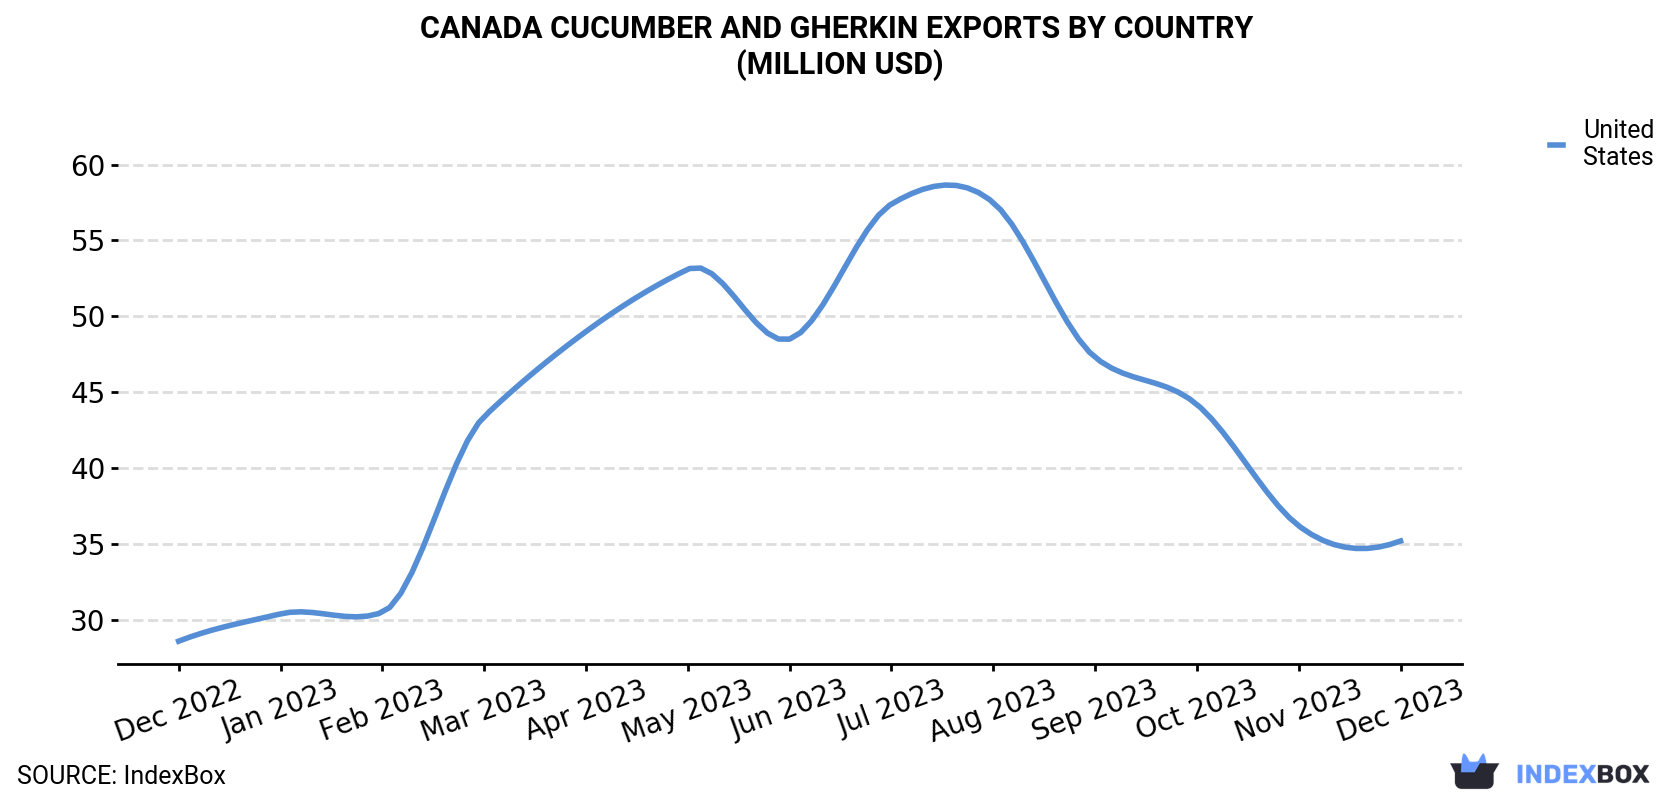 Canada Cucumber And Gherkin Exports By Country (Million USD)